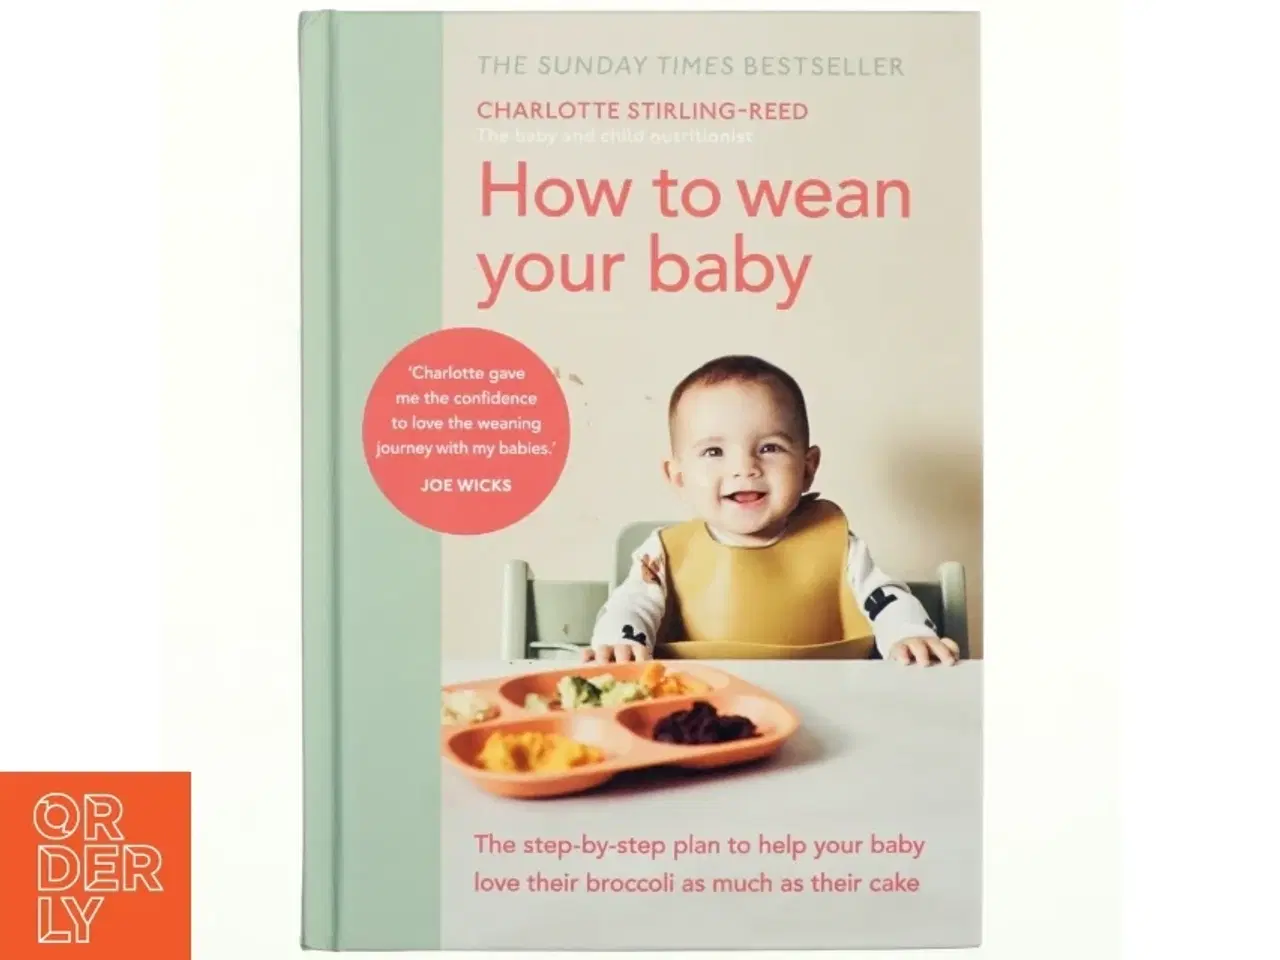 Billede 1 - How to wean your baby : the step-by-step plan to help your baby love their broccoli as much as their cake af Charlotte Stirling-Reed (Bog)